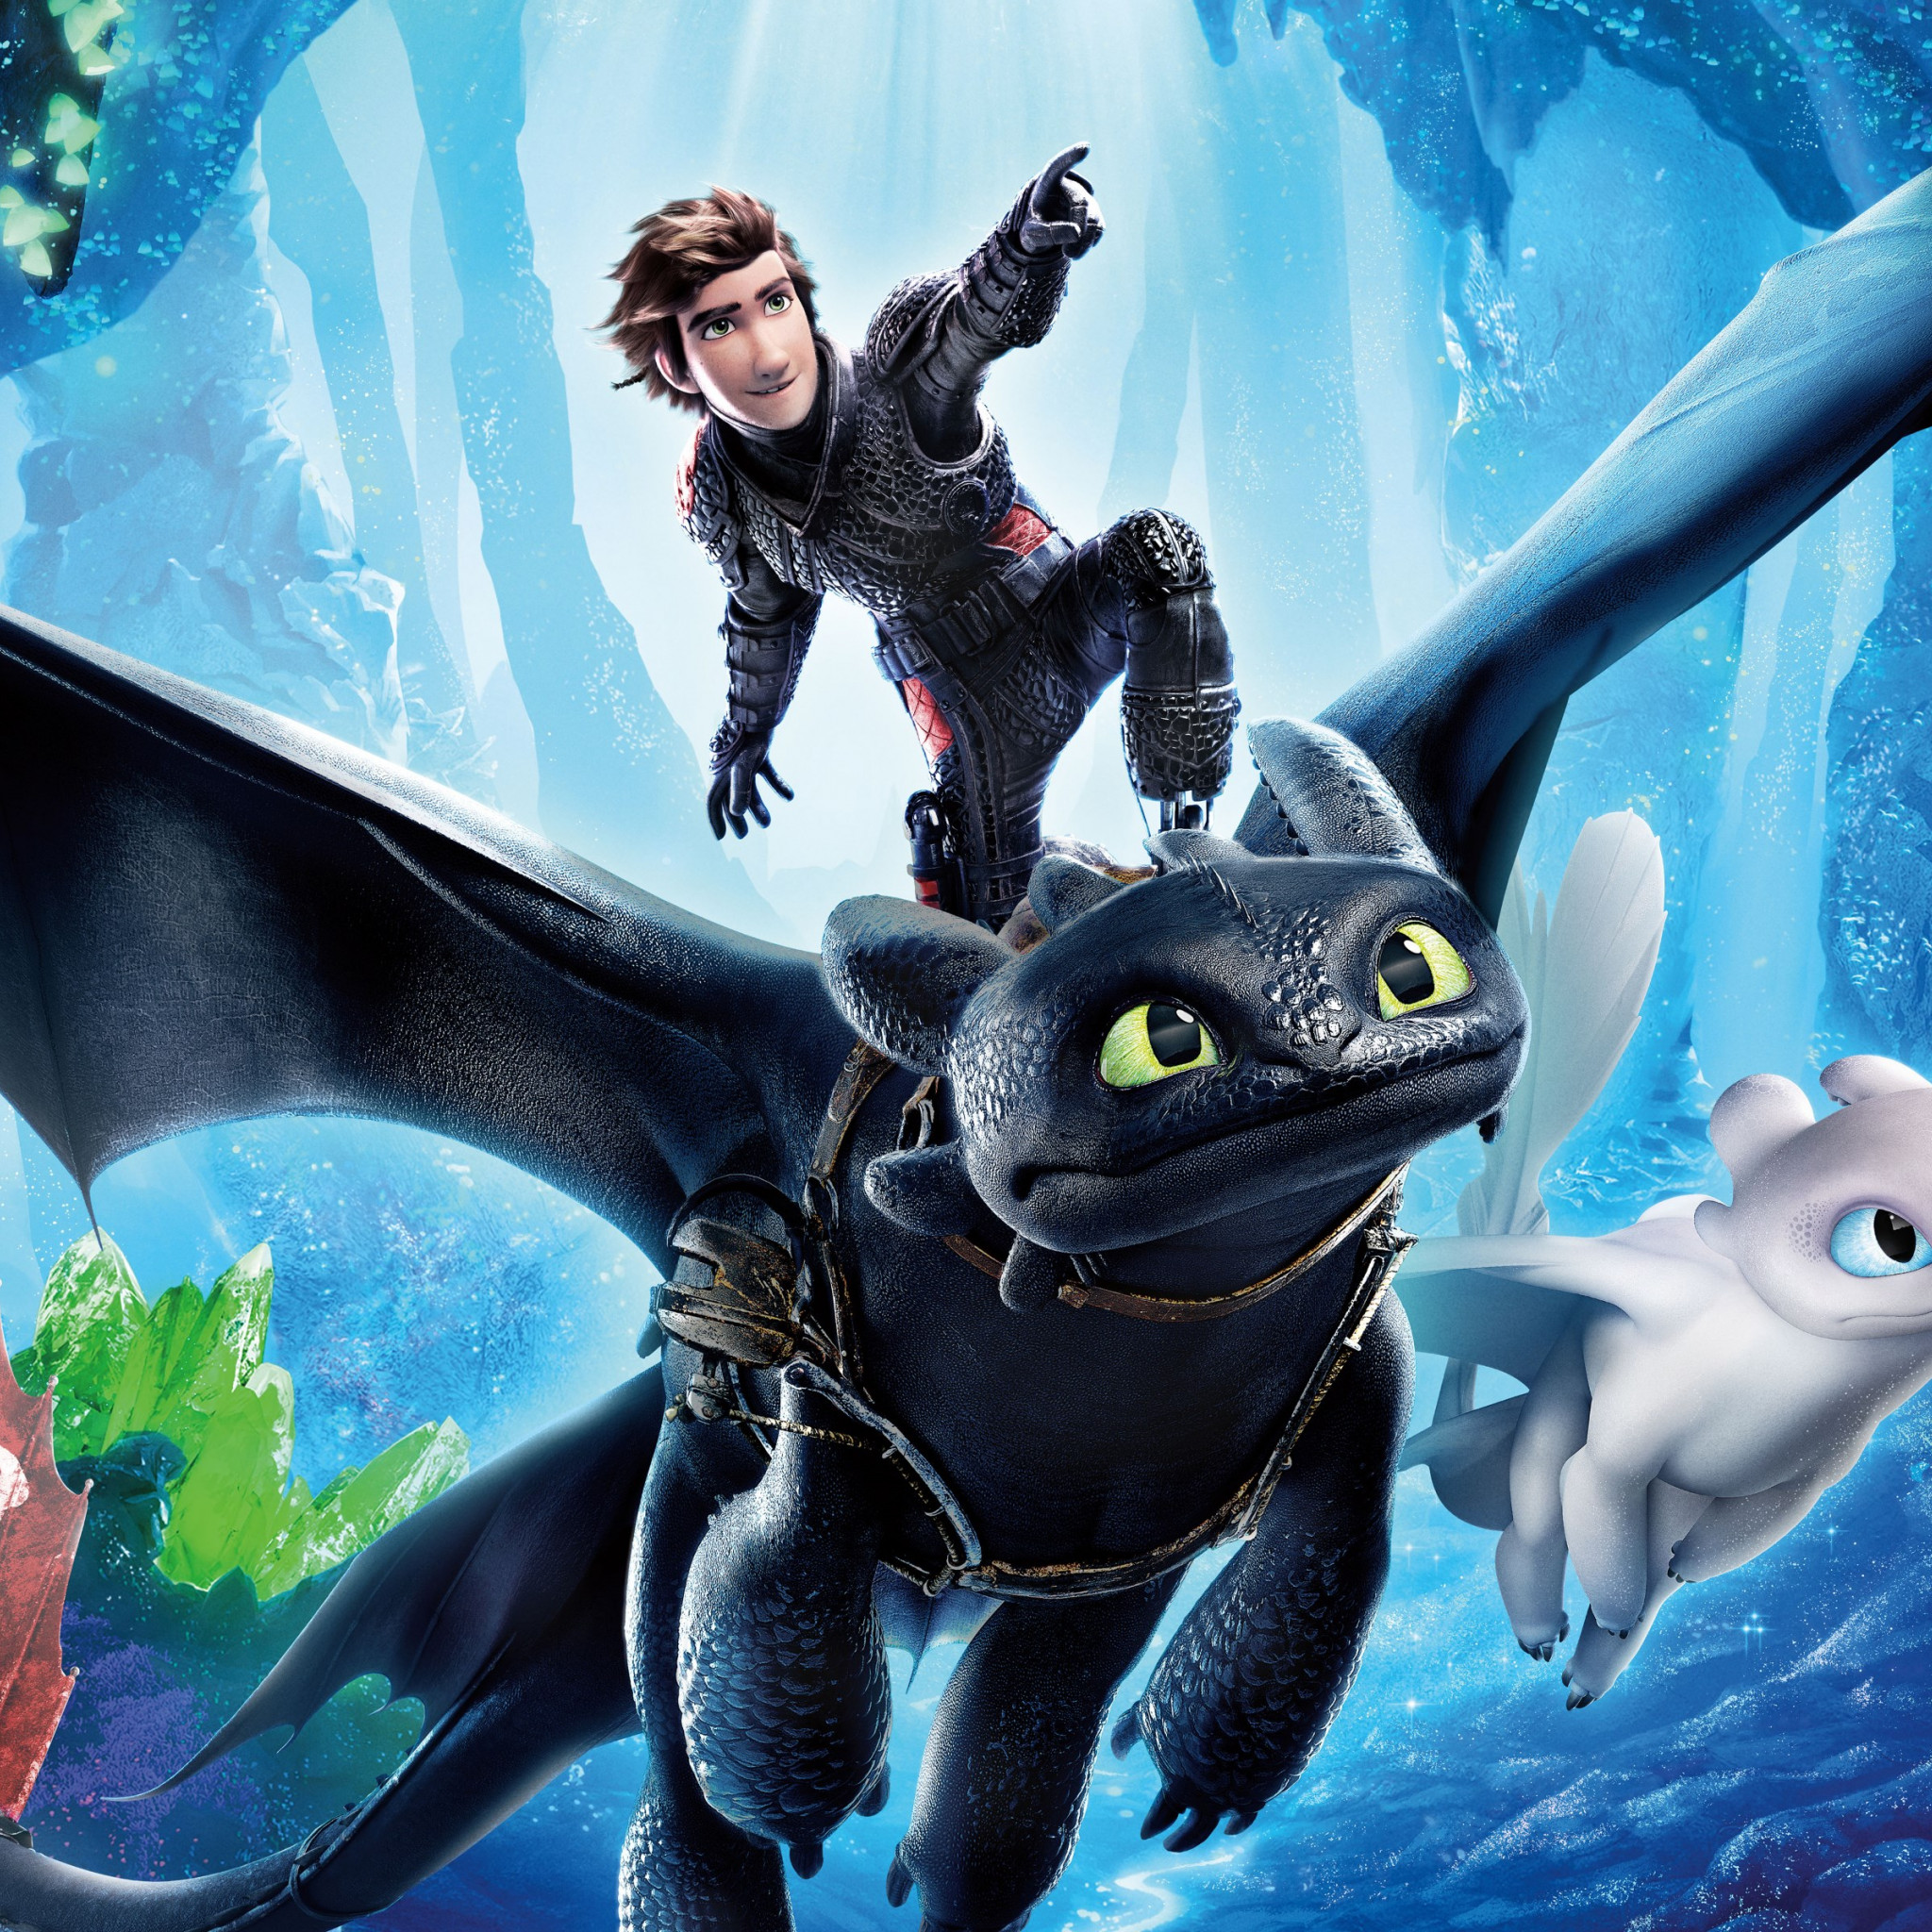 How to Train Your Dragon 2019 wallpaper 2048x2048